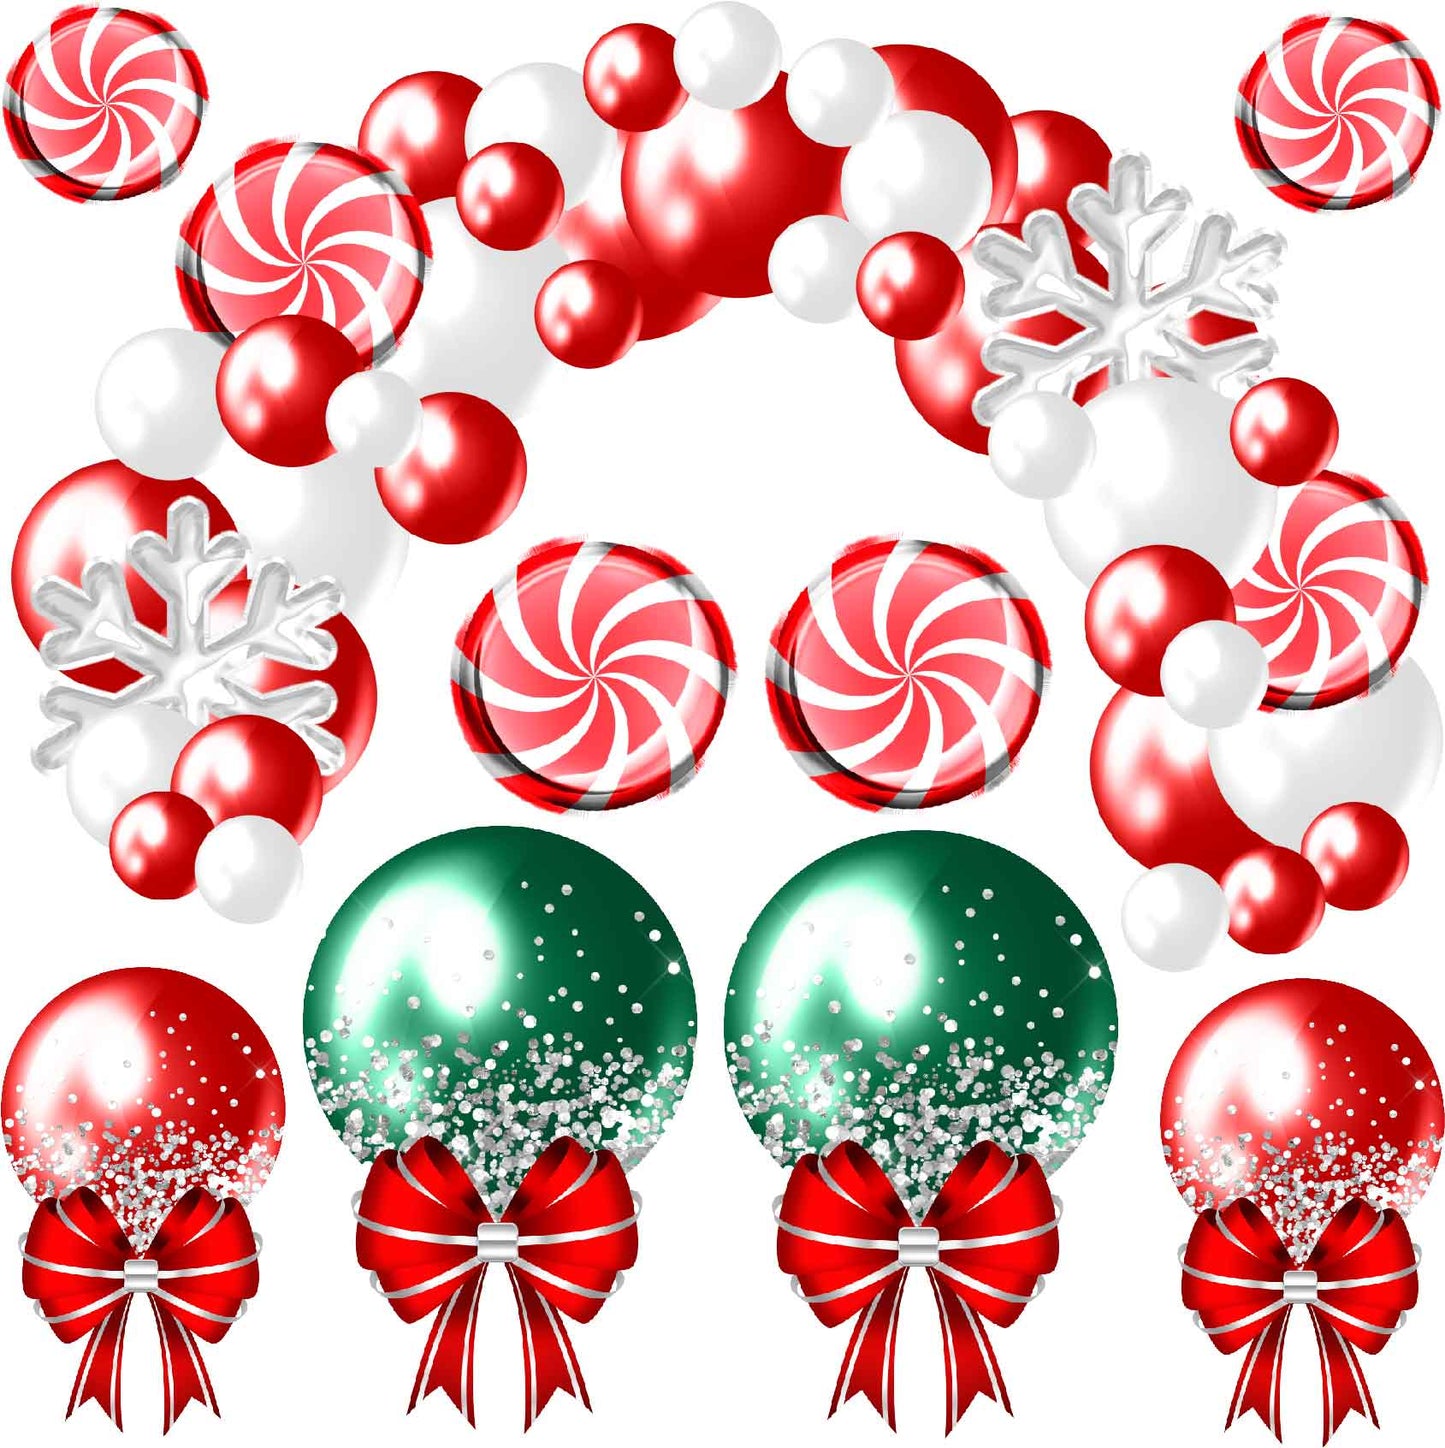 Christmas Balloons and Arch Set 1 Half Sheet  (Must Purchase 2 Half sheets - You Can Mix & Match)